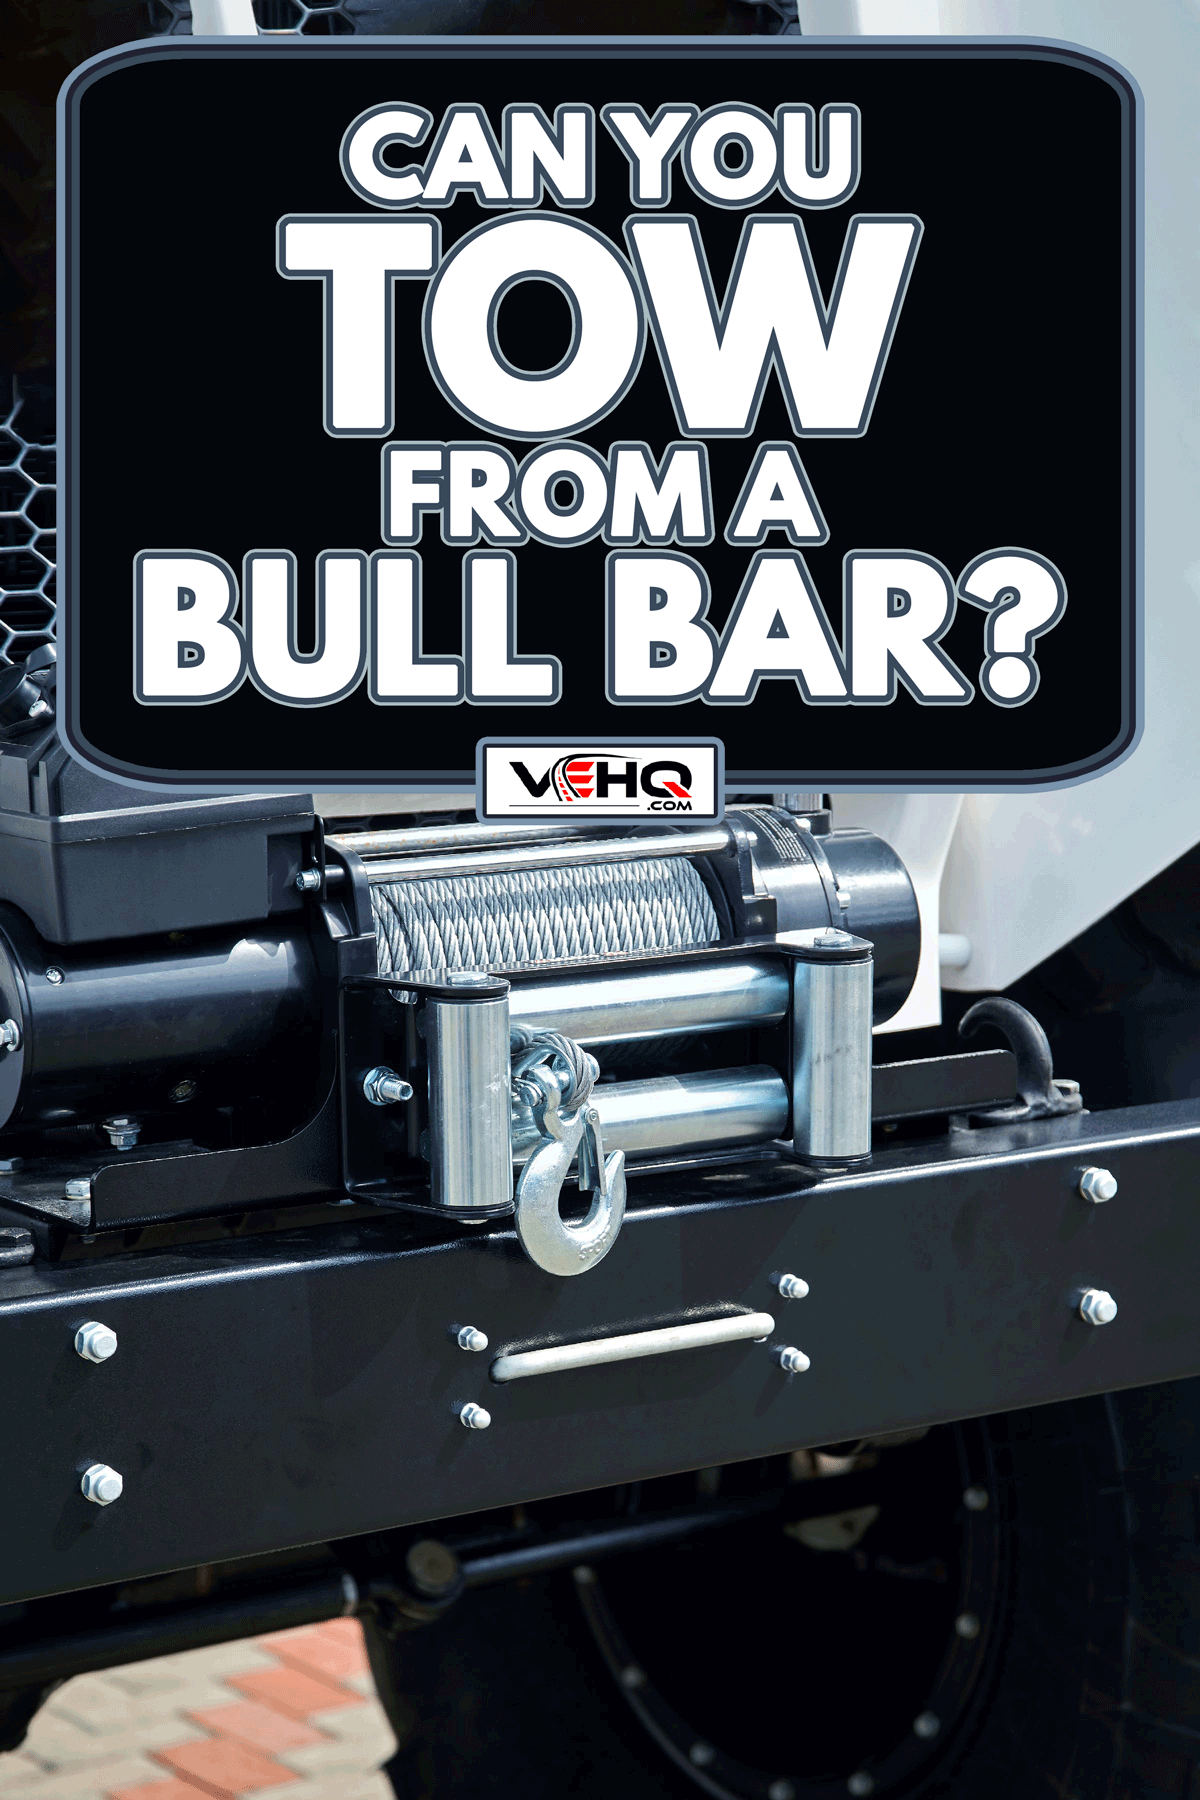 Automobile winch on off-road vehicle, Can You Tow From A Bull Bar?